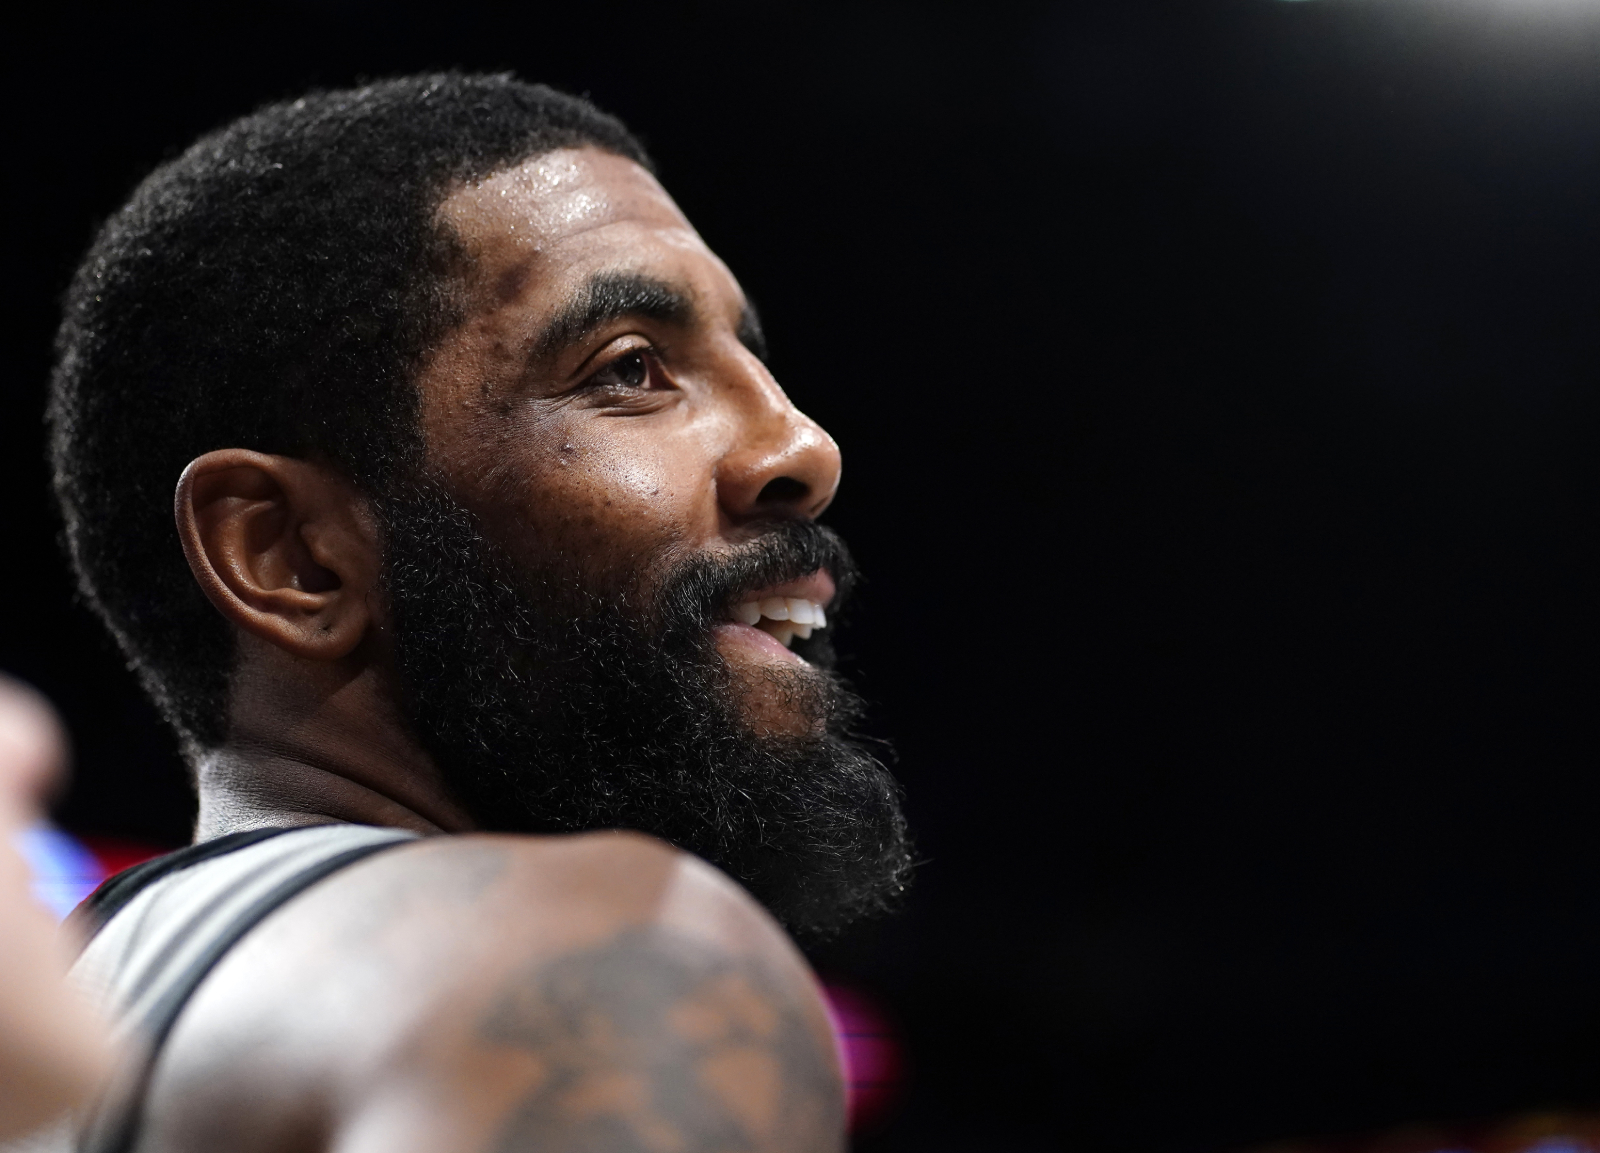 Kyrie Irving made some questionable comments about Nets coach Steve Nash a couple of months ago. However, he is now showing him some respect.